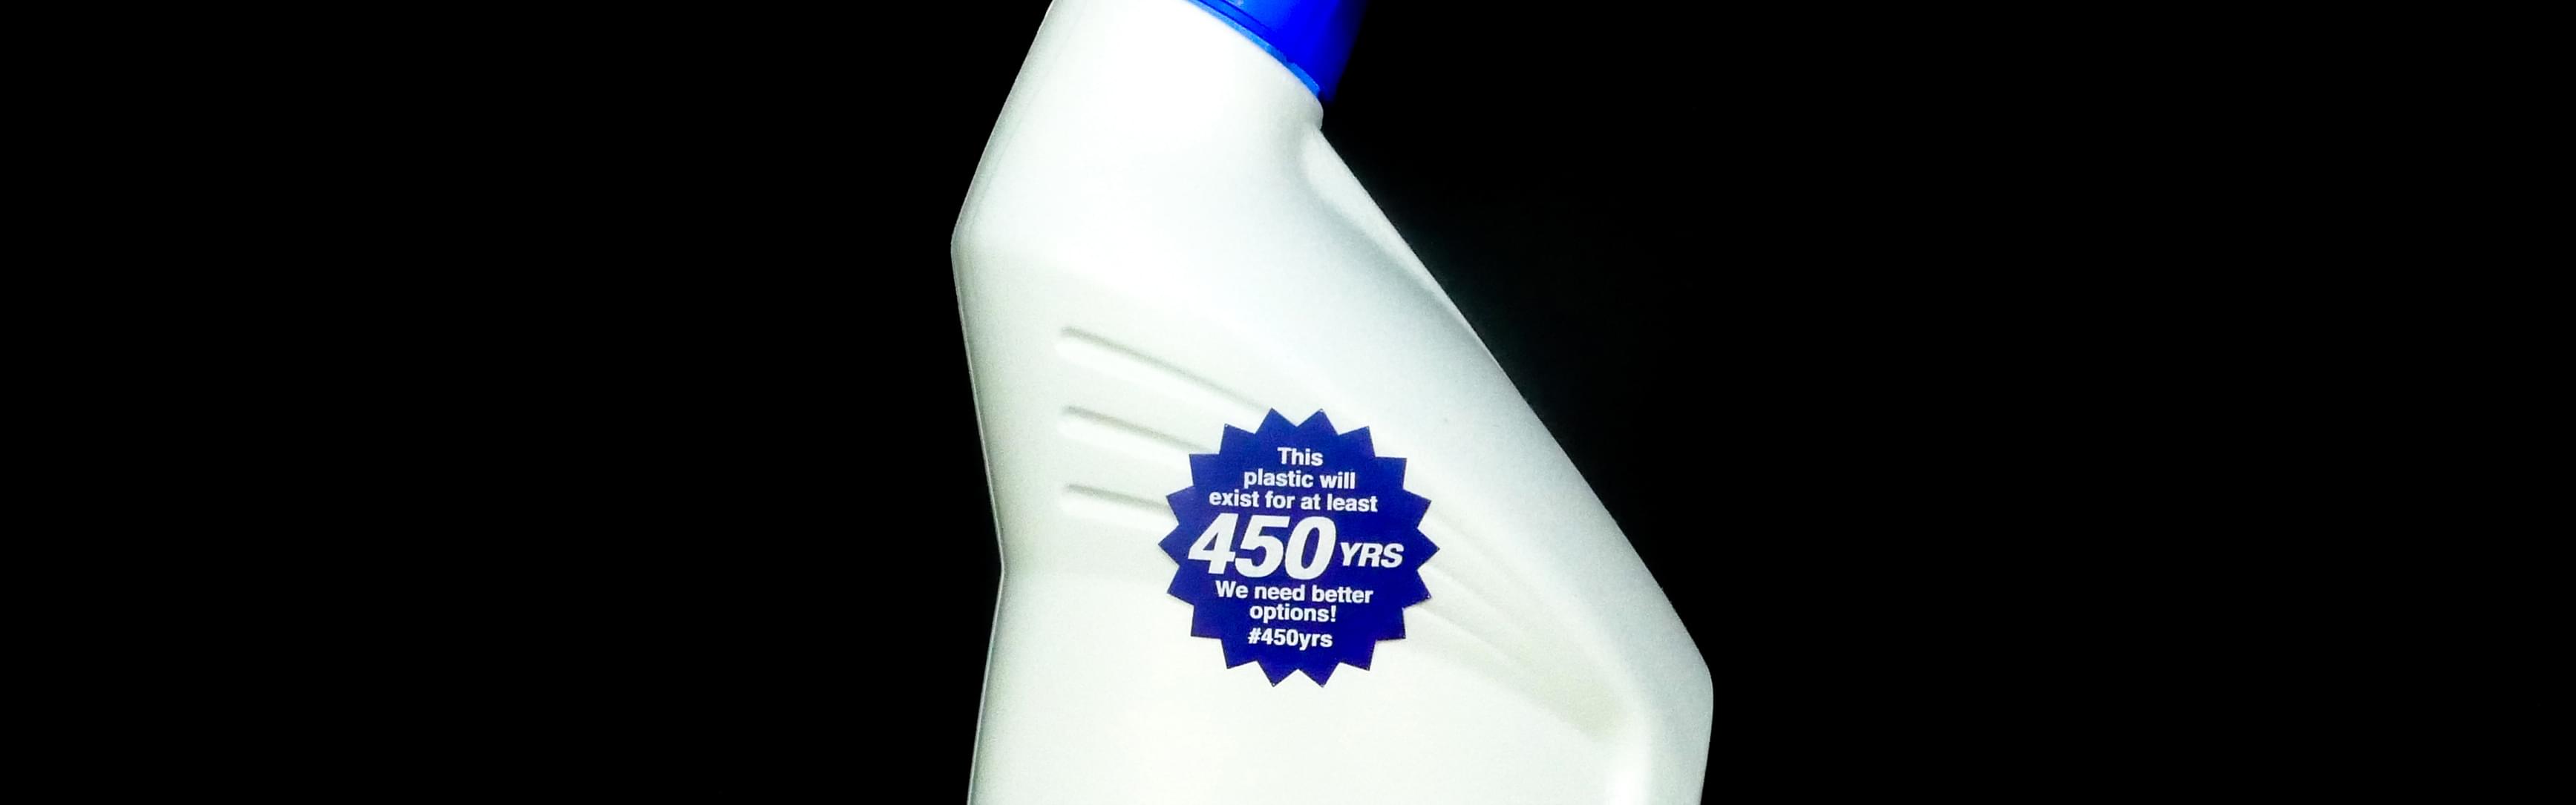 Close-up photograph of a blue plastic bottle, shaped like a liquid soap container. On the front of the bottle is a magenta, sunburst-shaped sticker that says, 'This plastic will exist for at least 450 YRS. We need better options! #450yrs.'